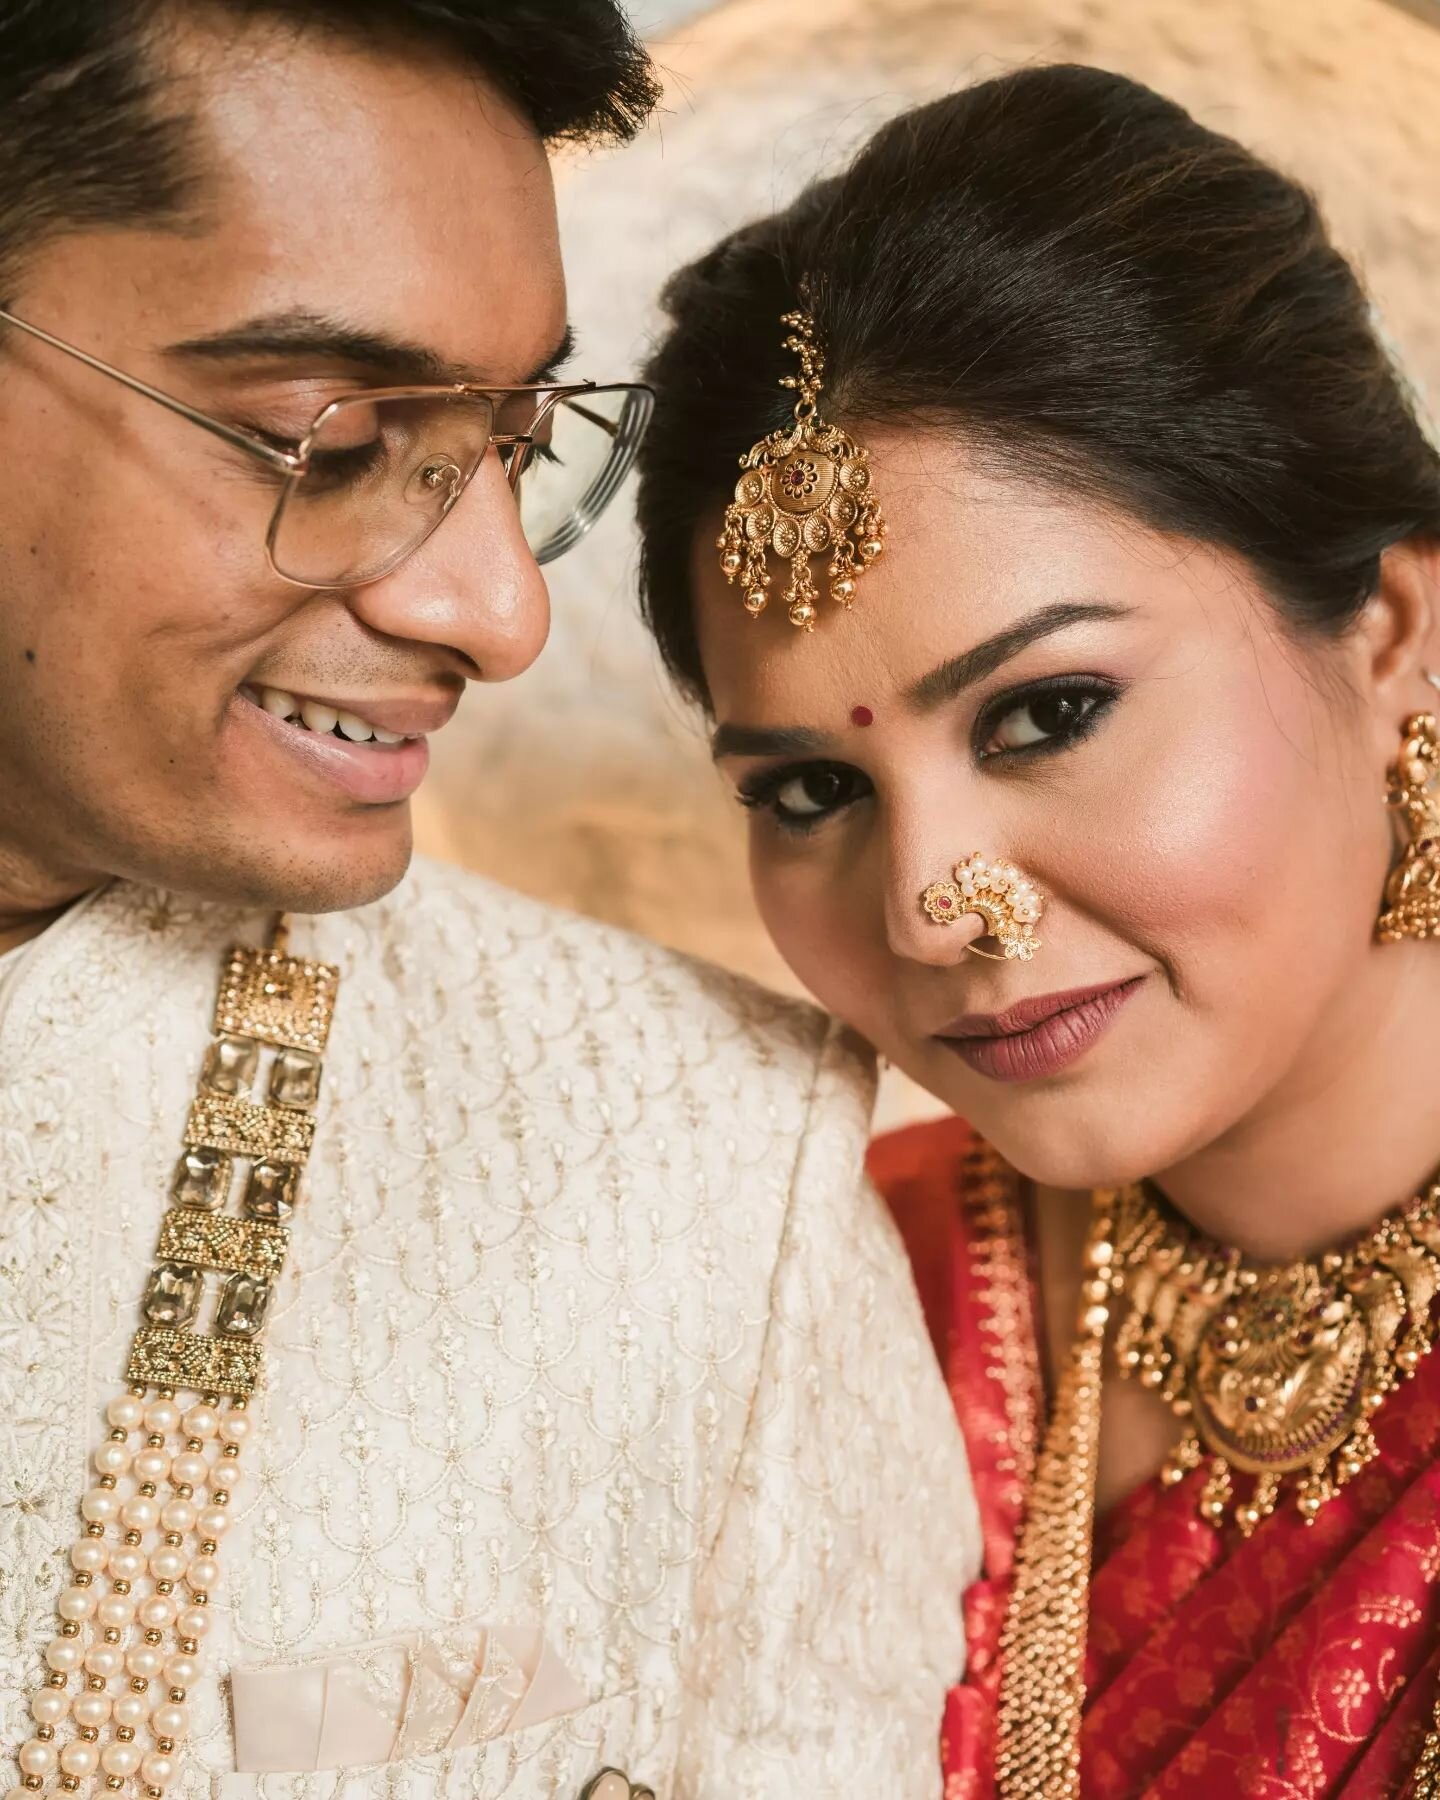 Royal Rhythm: Together, Amrut and Payal groove through life's melodies, their chemistry hitting all the right notes and turning their wedding into a royal jam session of love and laughter. #MatchMadeInHeaven

#anamcharaweddings #coupleportrait #coupl